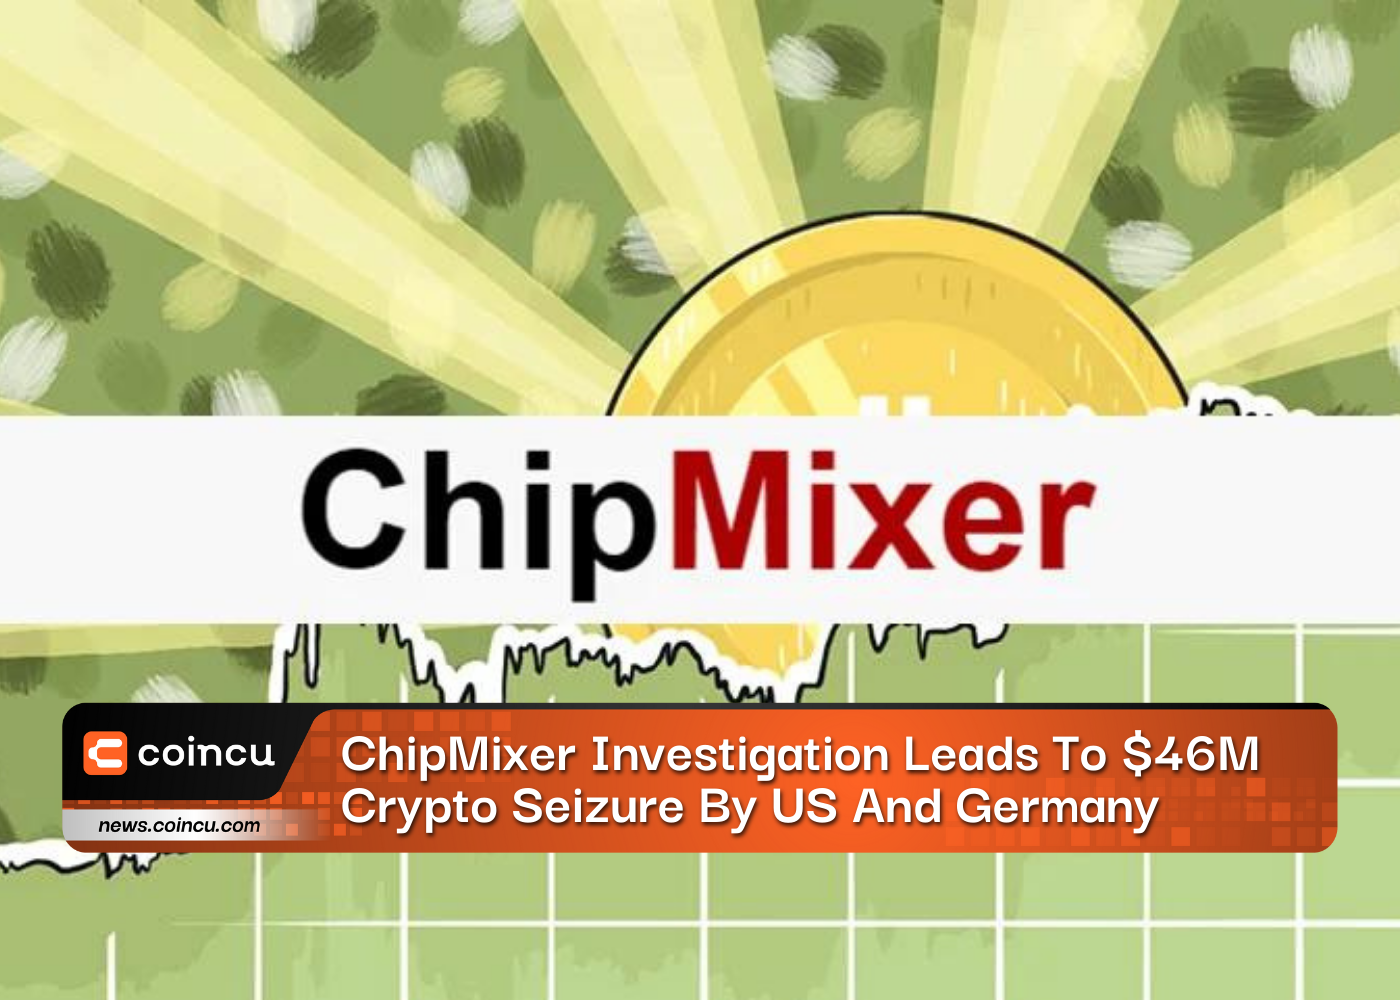 ChipMixer Investigation Leads To 46M